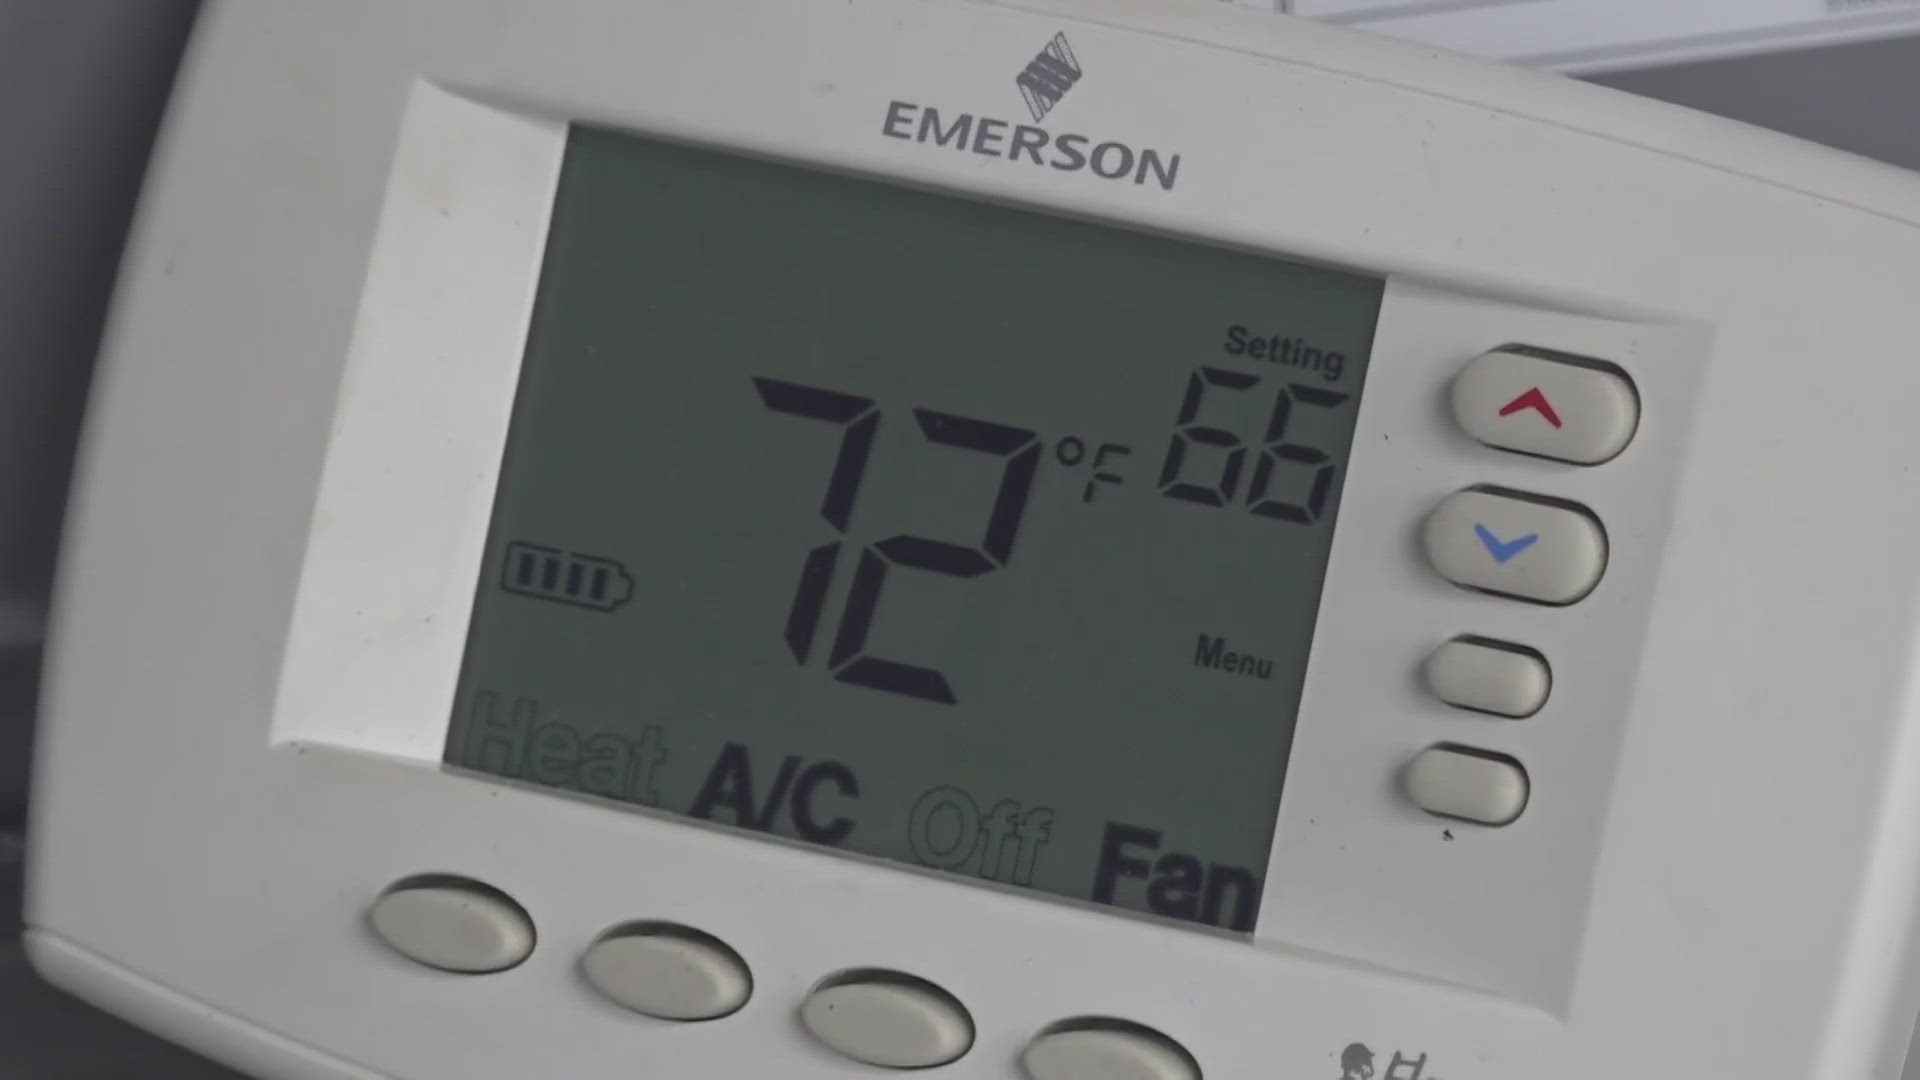 Experts say there are three things to avoid when trying to remain energy efficient when the temps rise.